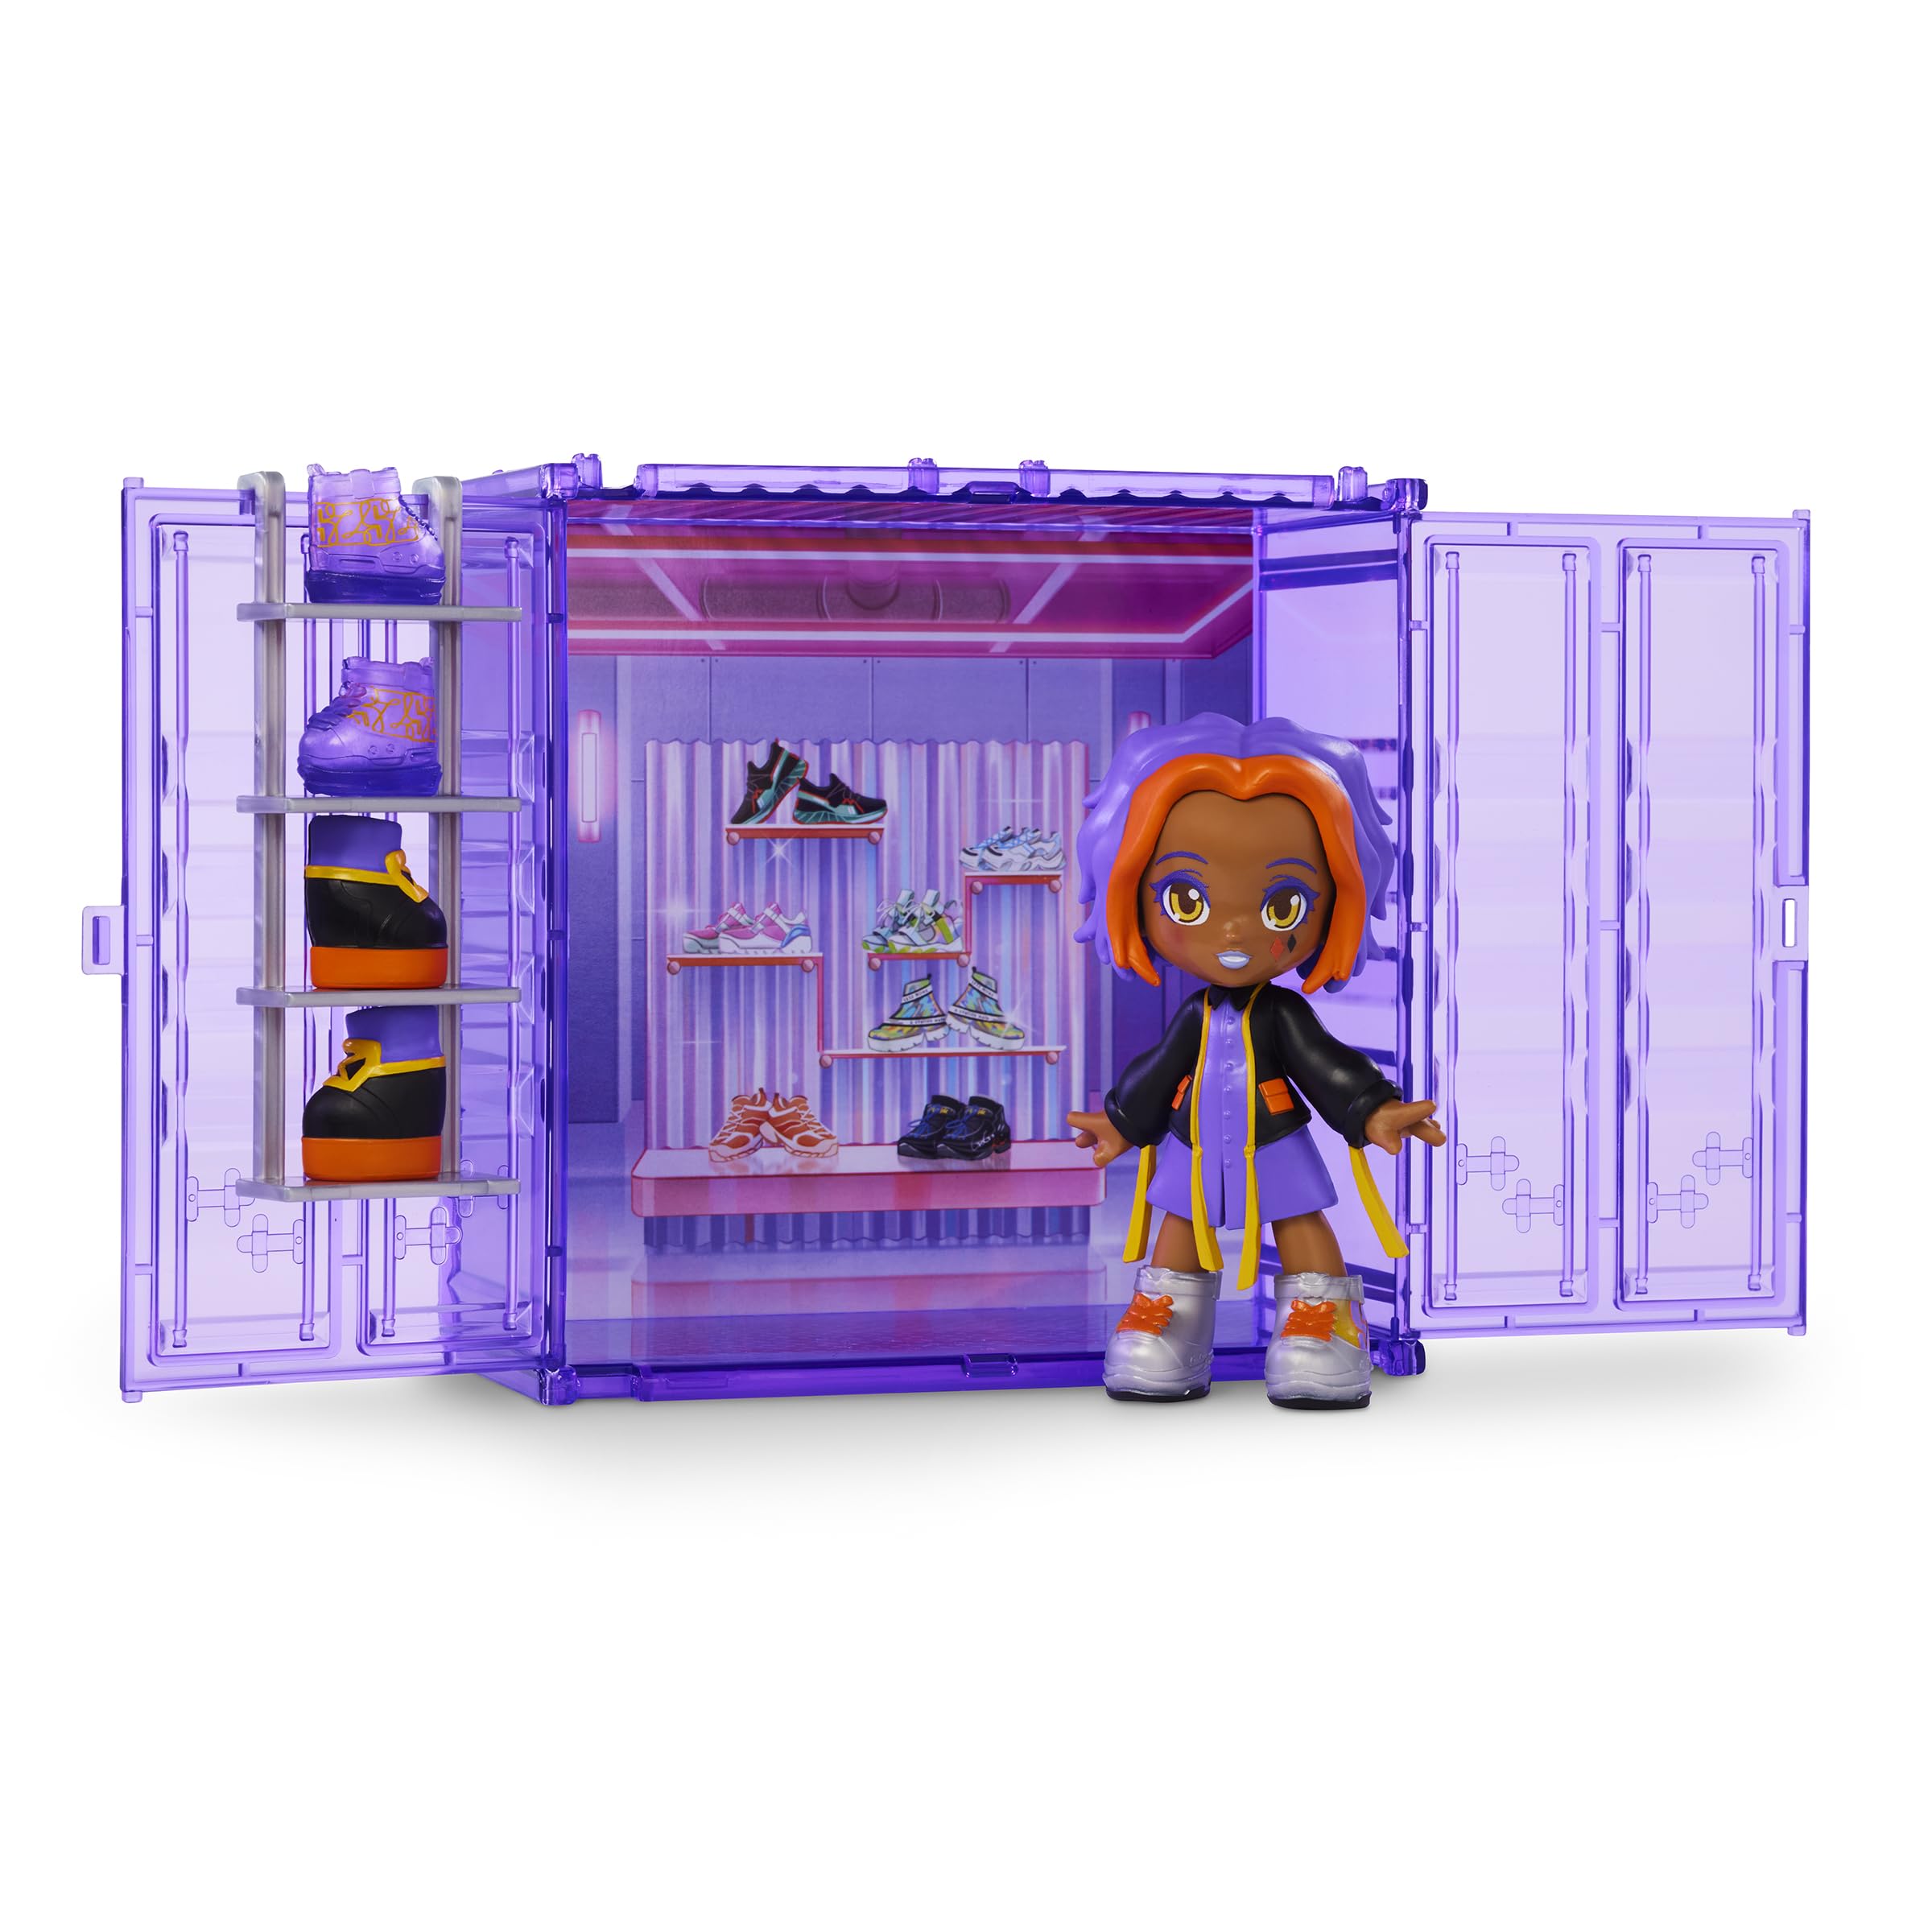 Far Out Toys Squadz Place - Tokyo Trends Surprise Dolls with Unique Vibes, Fashion Sense, and Personality - Collectible Tiny Home with Fashion-Forward Surprises